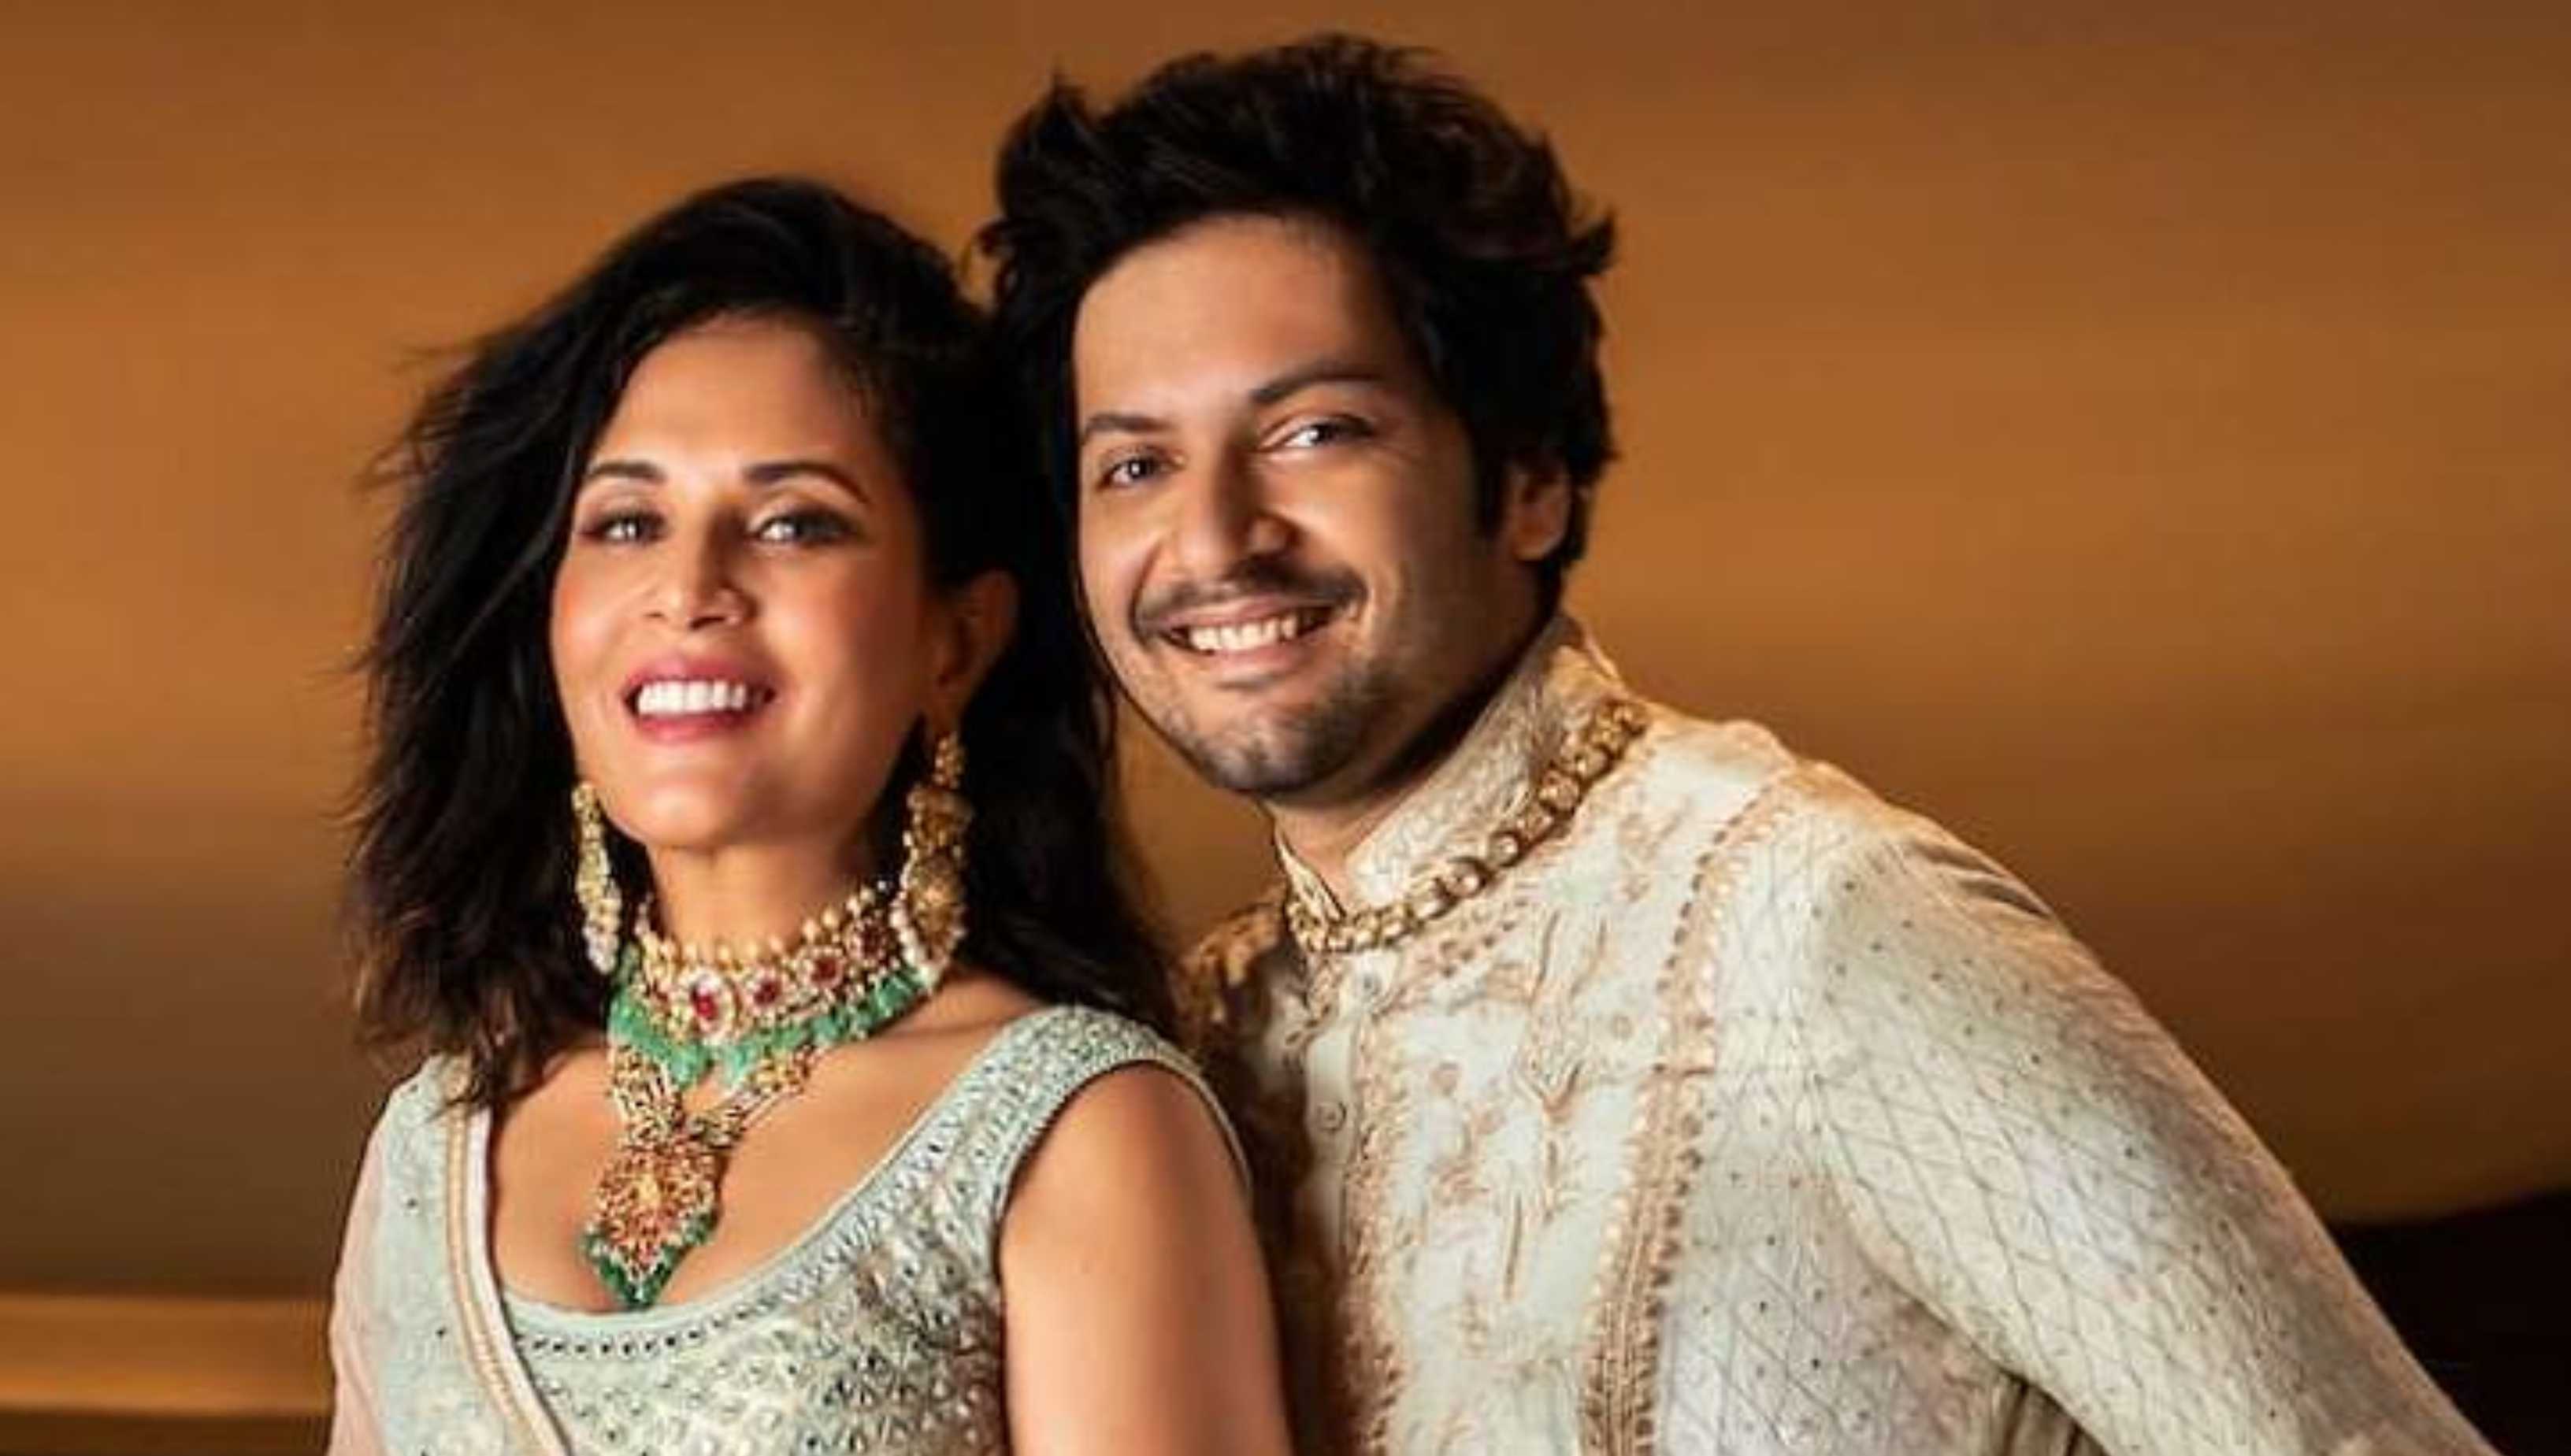 Richa Chadha and Ali Fazal to tie the knot next month; here’s all we know about their mehendi, wedding and reception